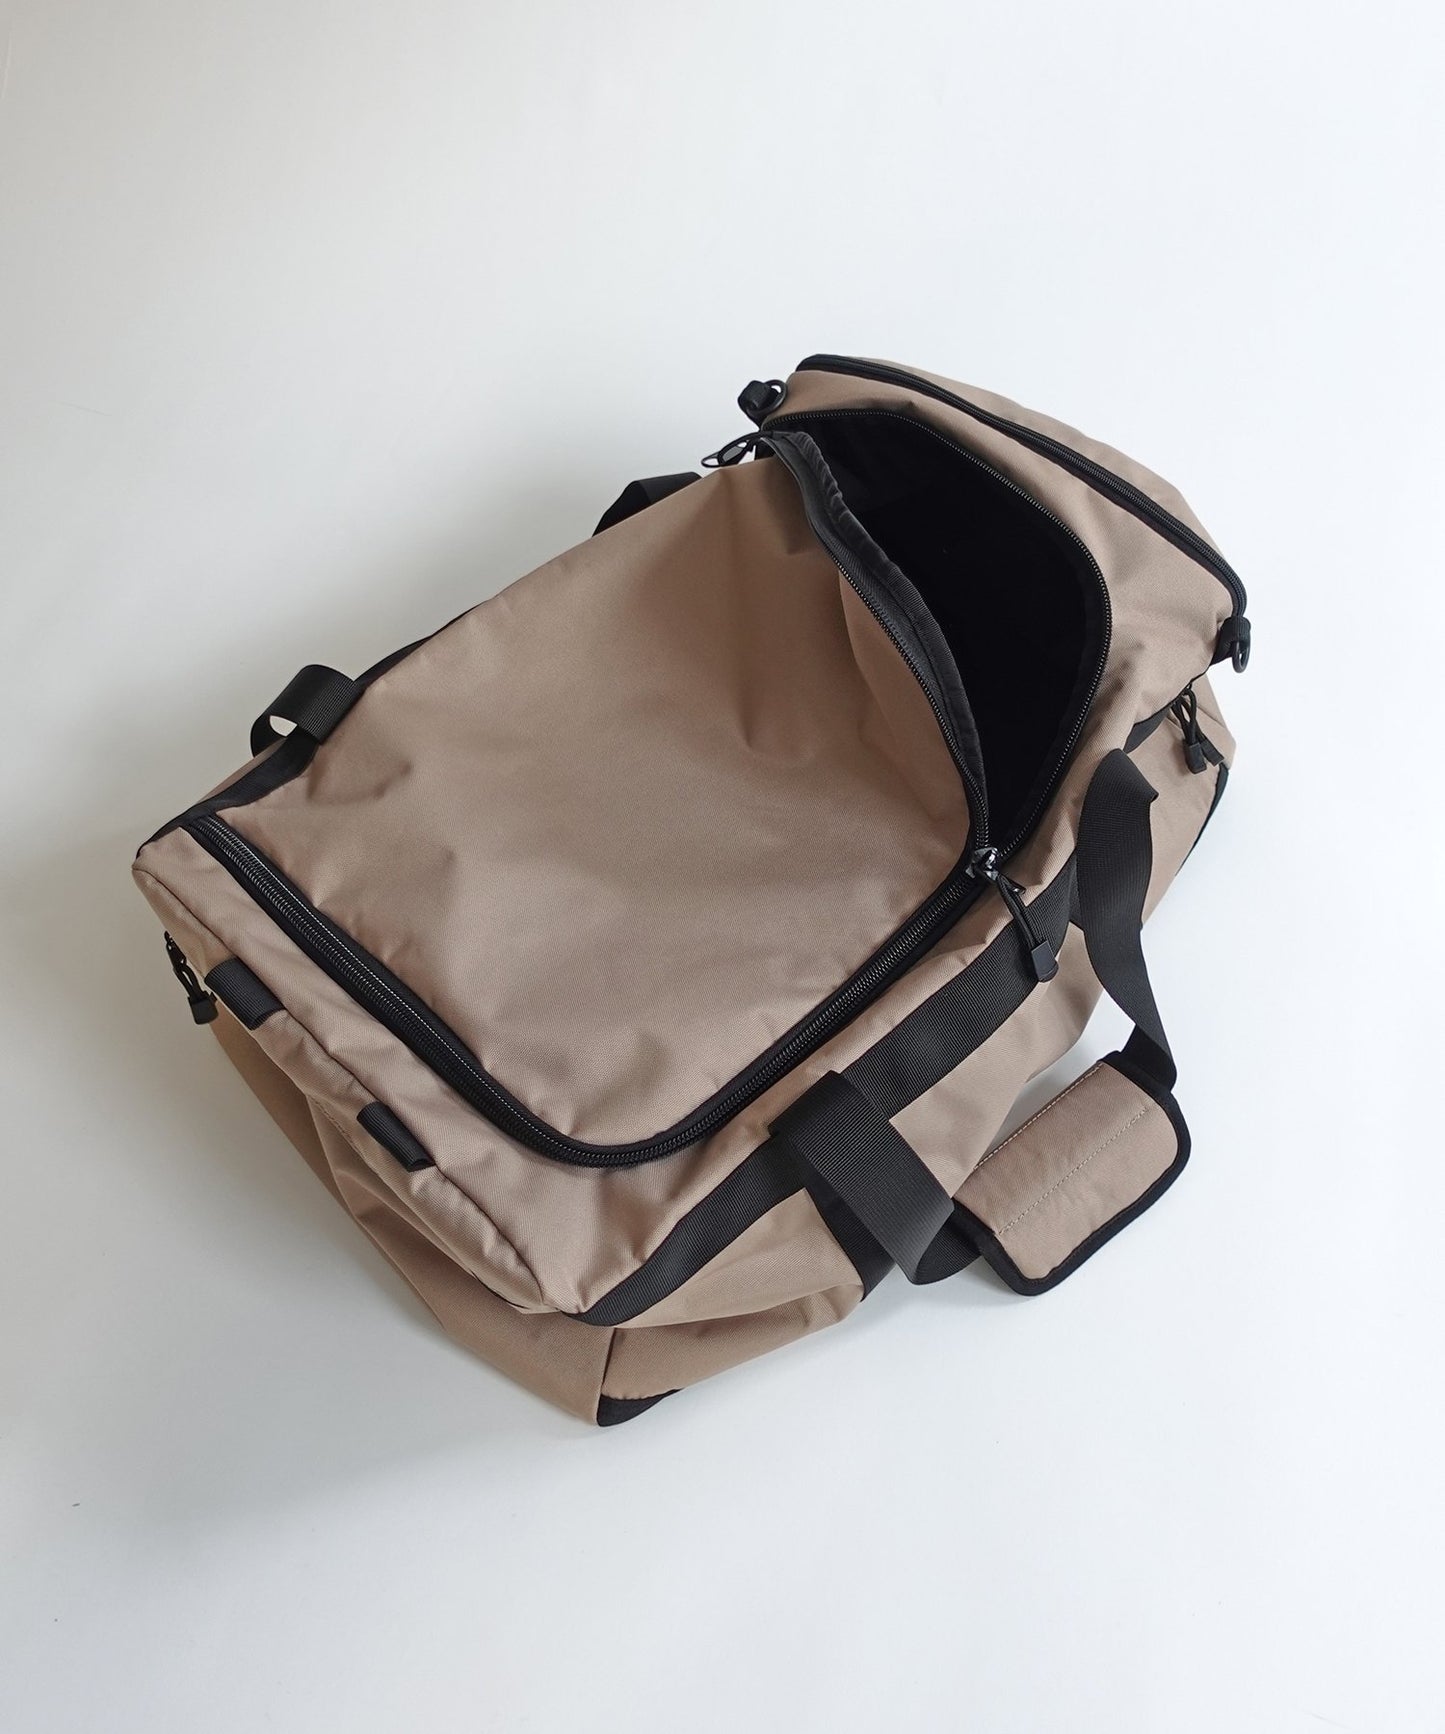 《Environmentally friendly materials》PLAYERS DUFFLE BAG 〈BEIGE〉 Club activities Forest school Camping [Capacity 50L]